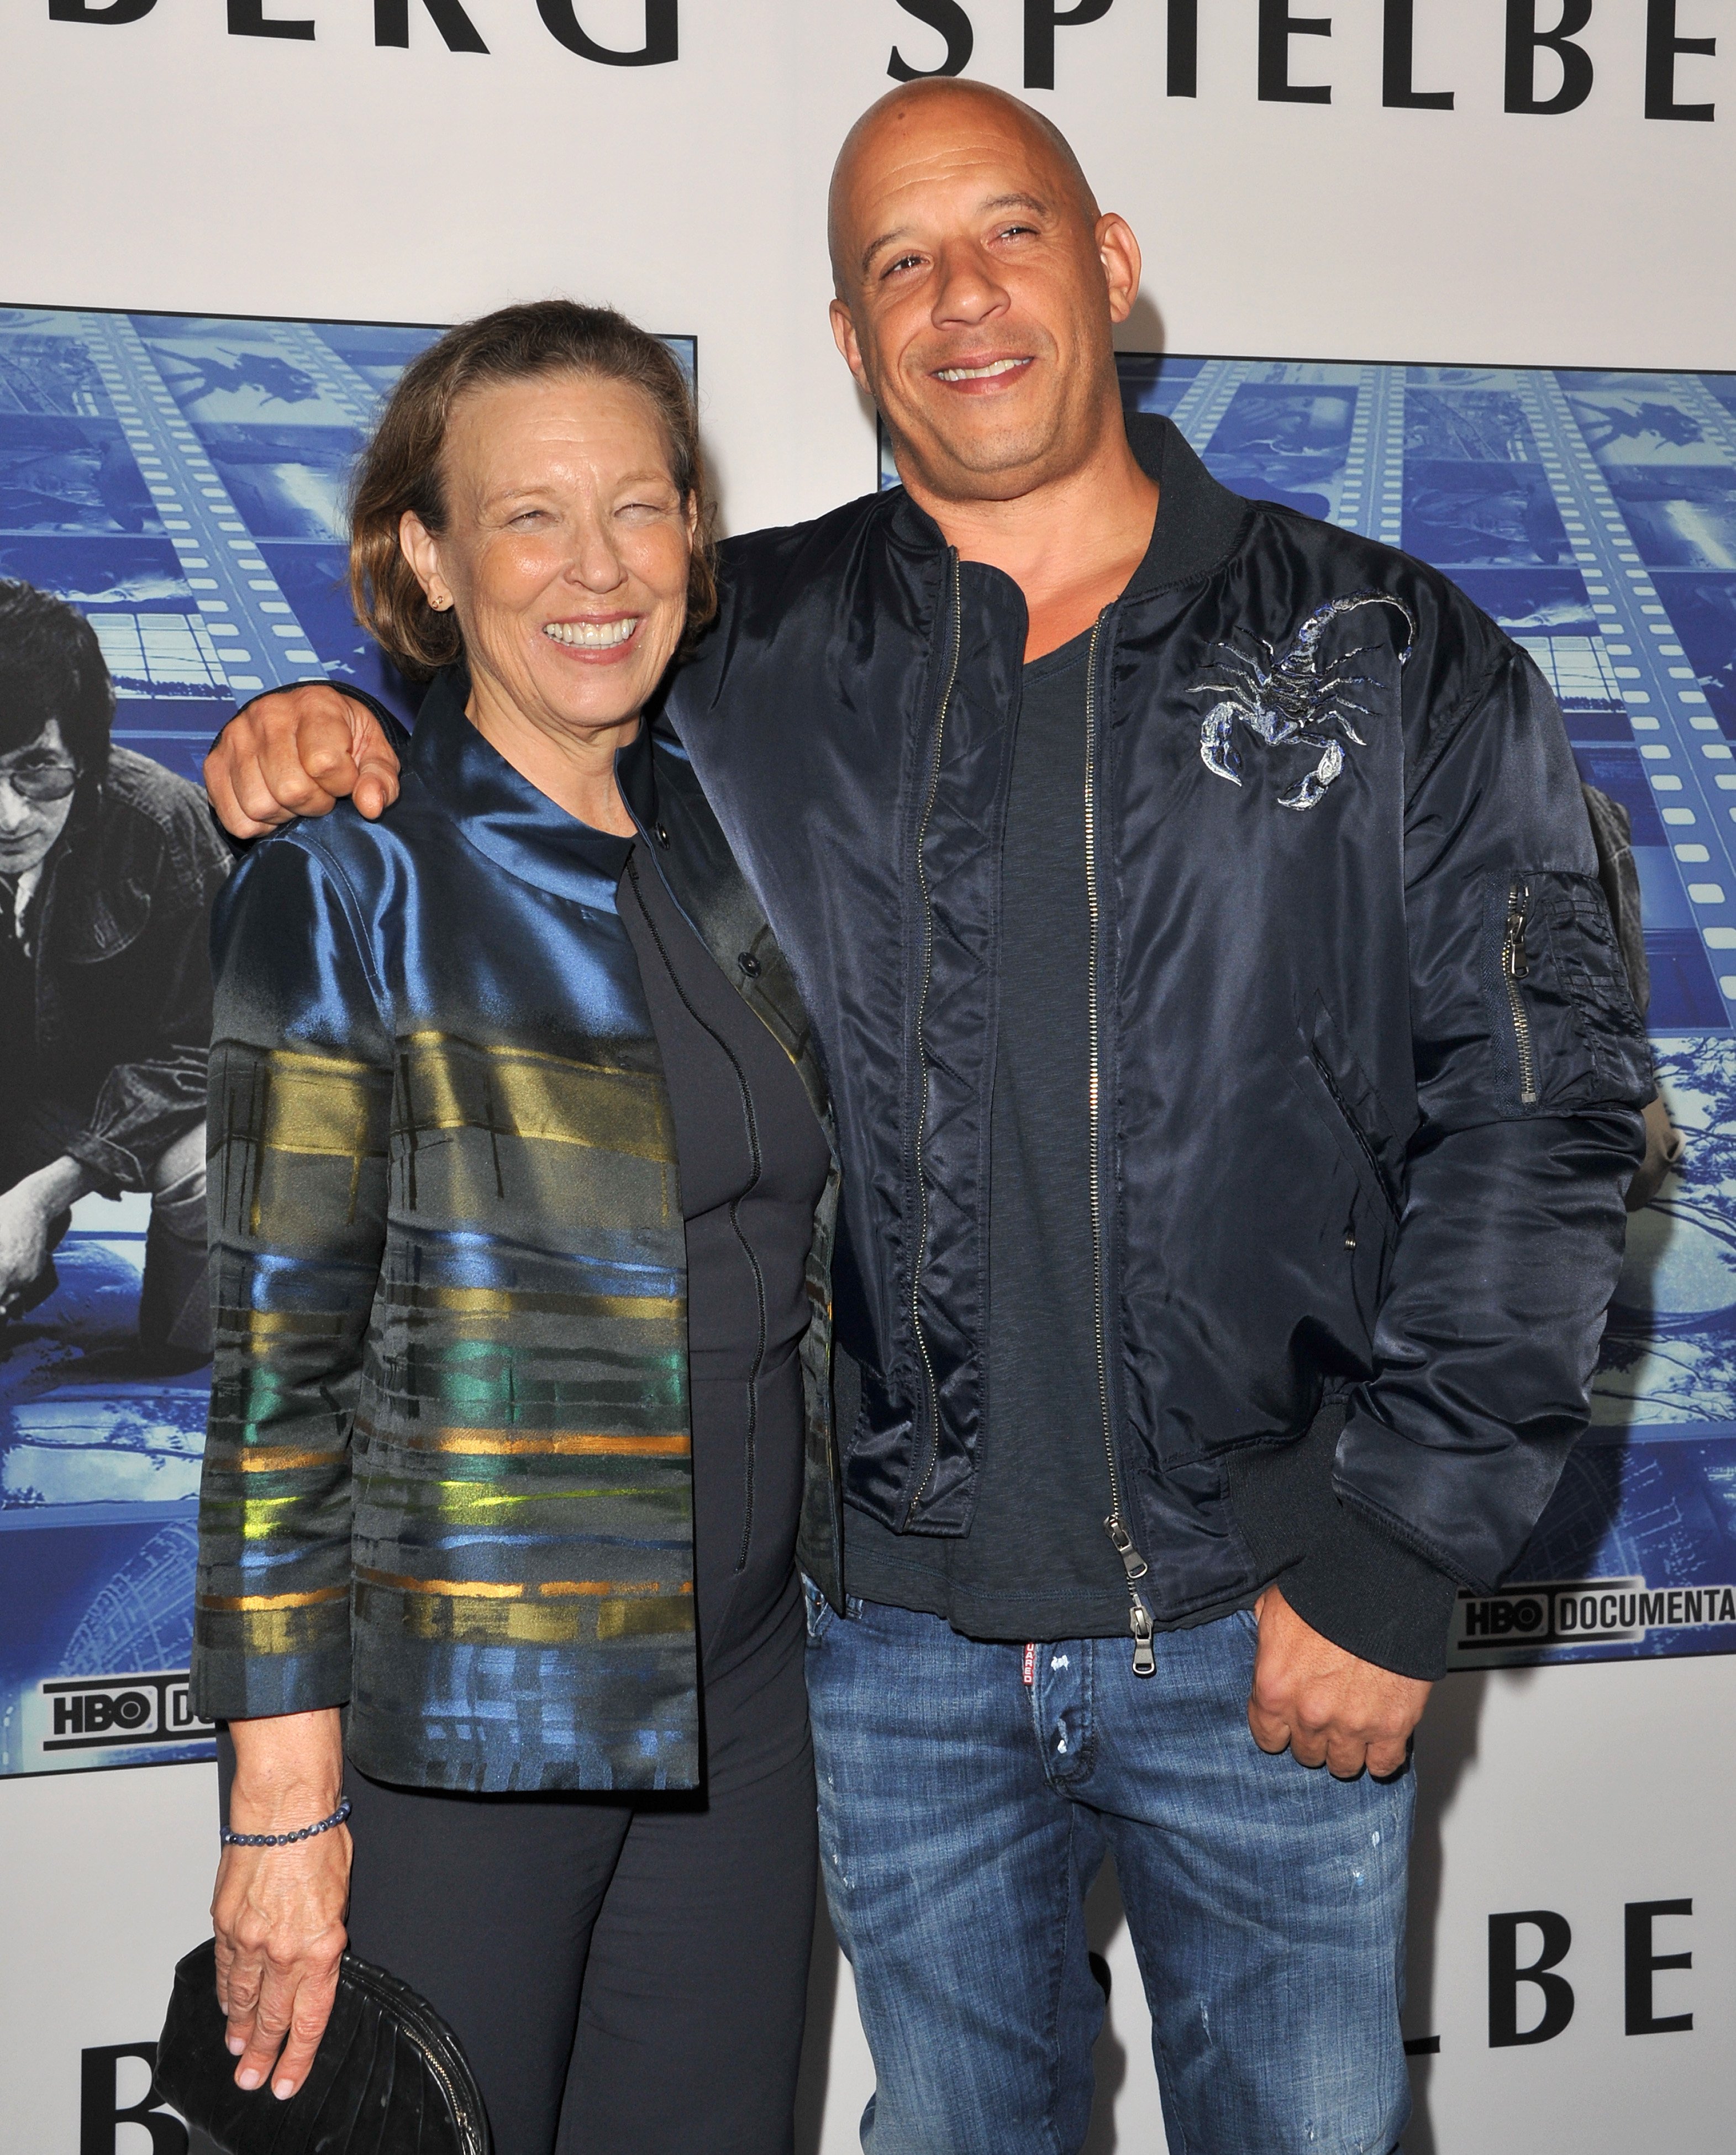 Vin Diesel and his mother, Delora Vincent, at the HBO Premiere of "Spielberg" on September 26, 2017, in Hollywood, California. | Source: Getty Images